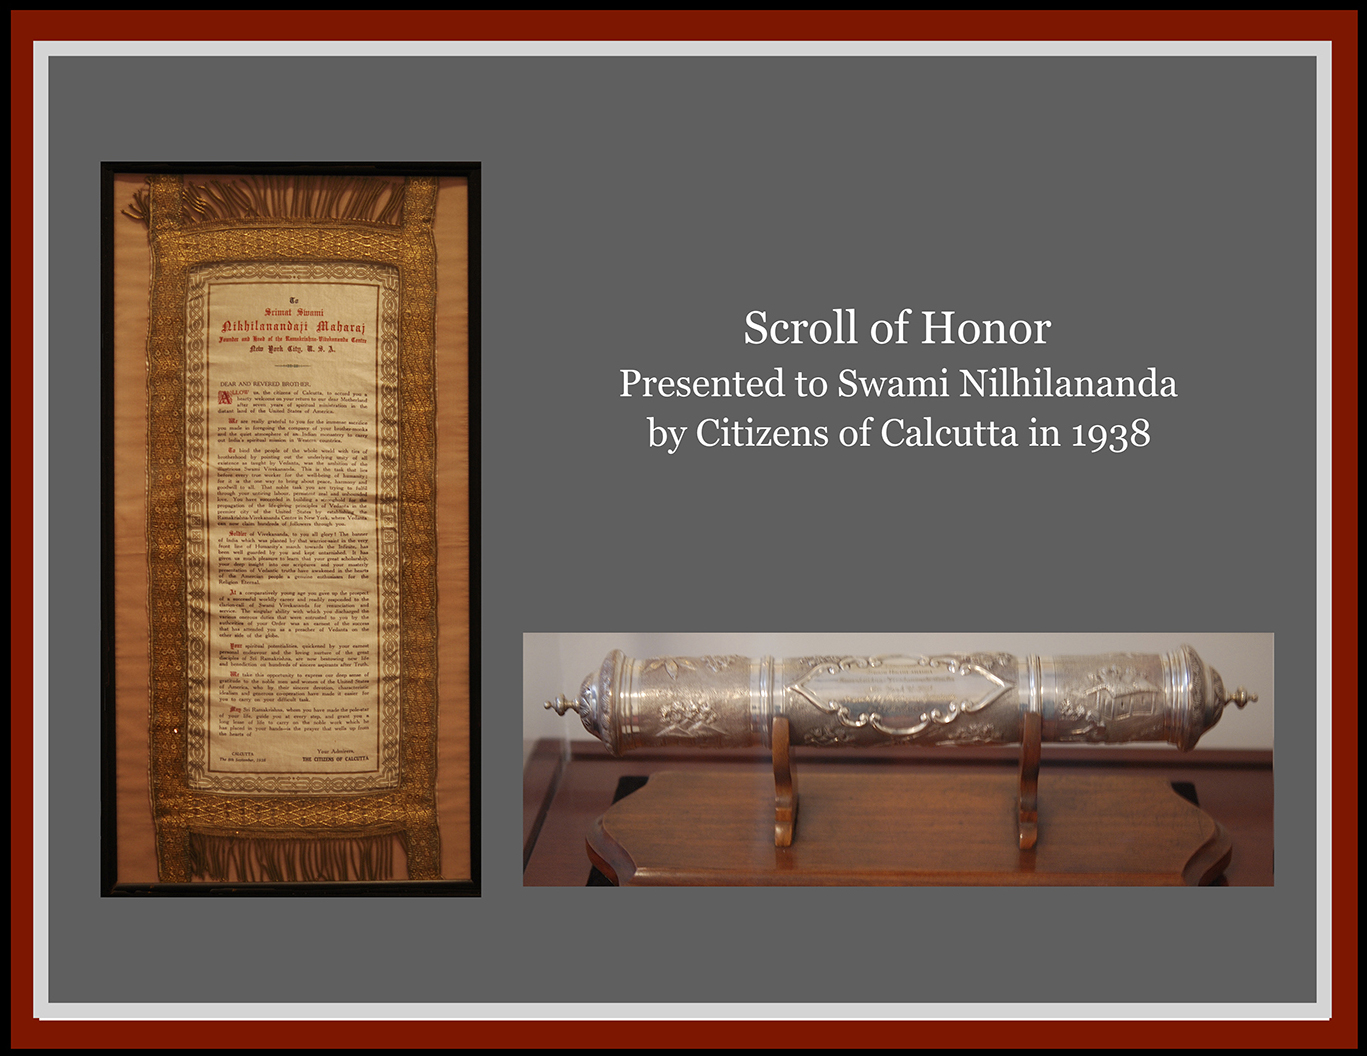 Scroll of Honor presented to Swami Vivekananda by Citizens of Calcutta.